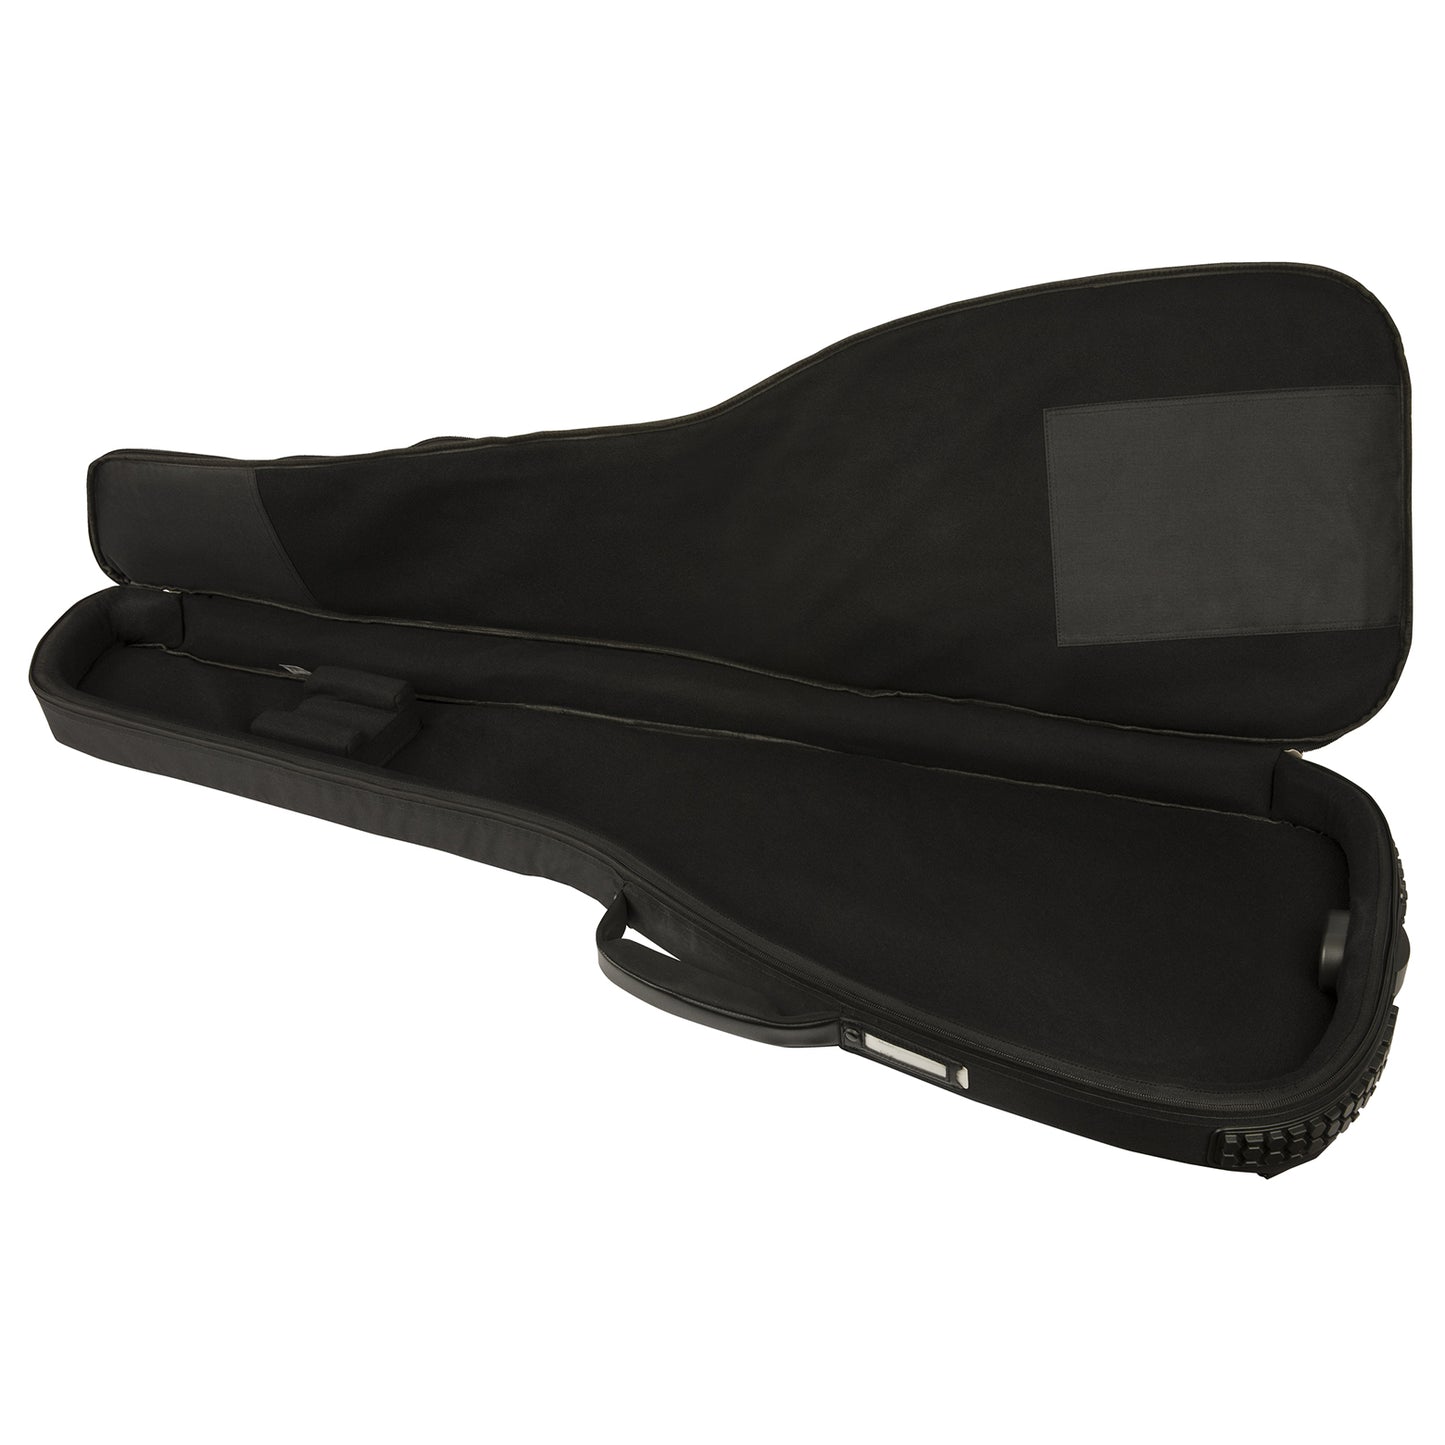 Fender FB620 Electric Bass Guitar Gig Bag Padded Case with Microfiber Lining, Neck Rest, Exterior Bumpers (Black)